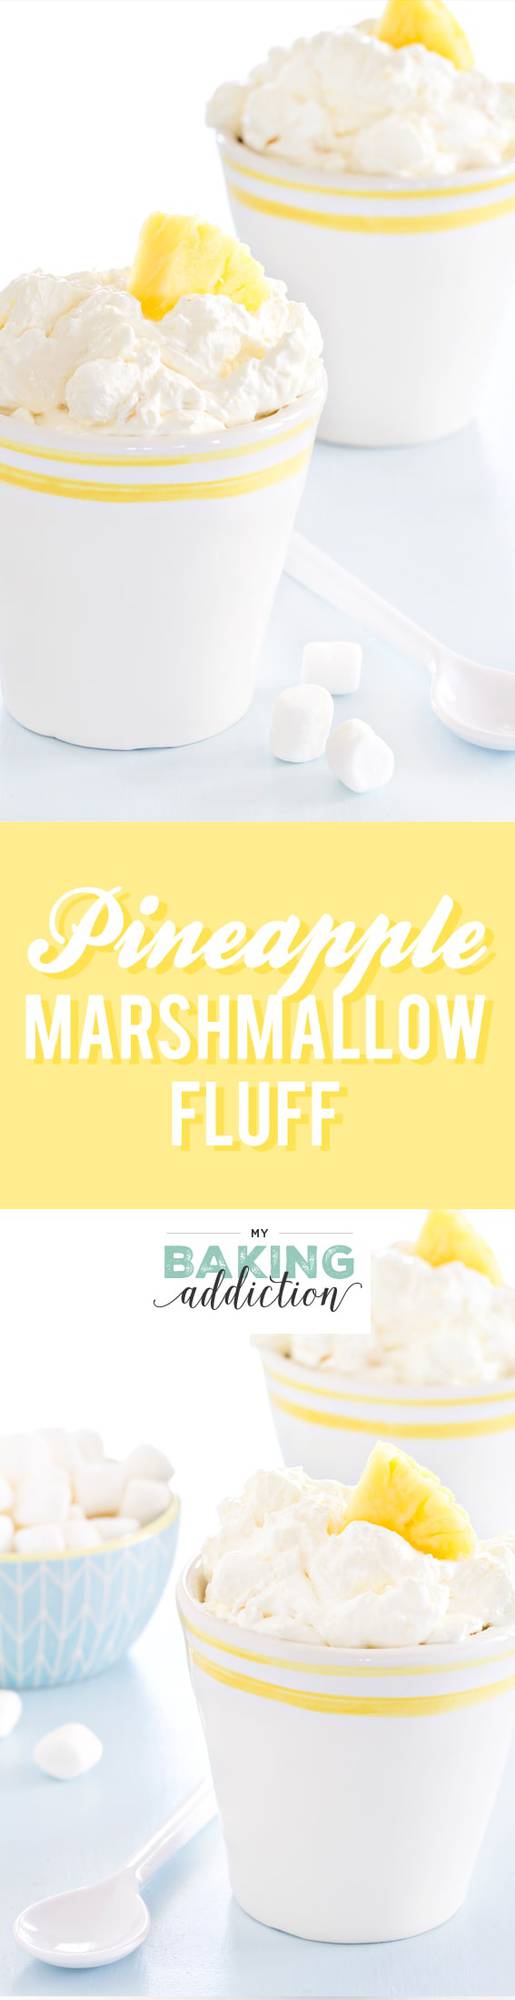 Pineapple Fluff is made with pineapple Jell-o mix and crushed pineapple. So easy and amazing! My family raves about this every single time I make it!